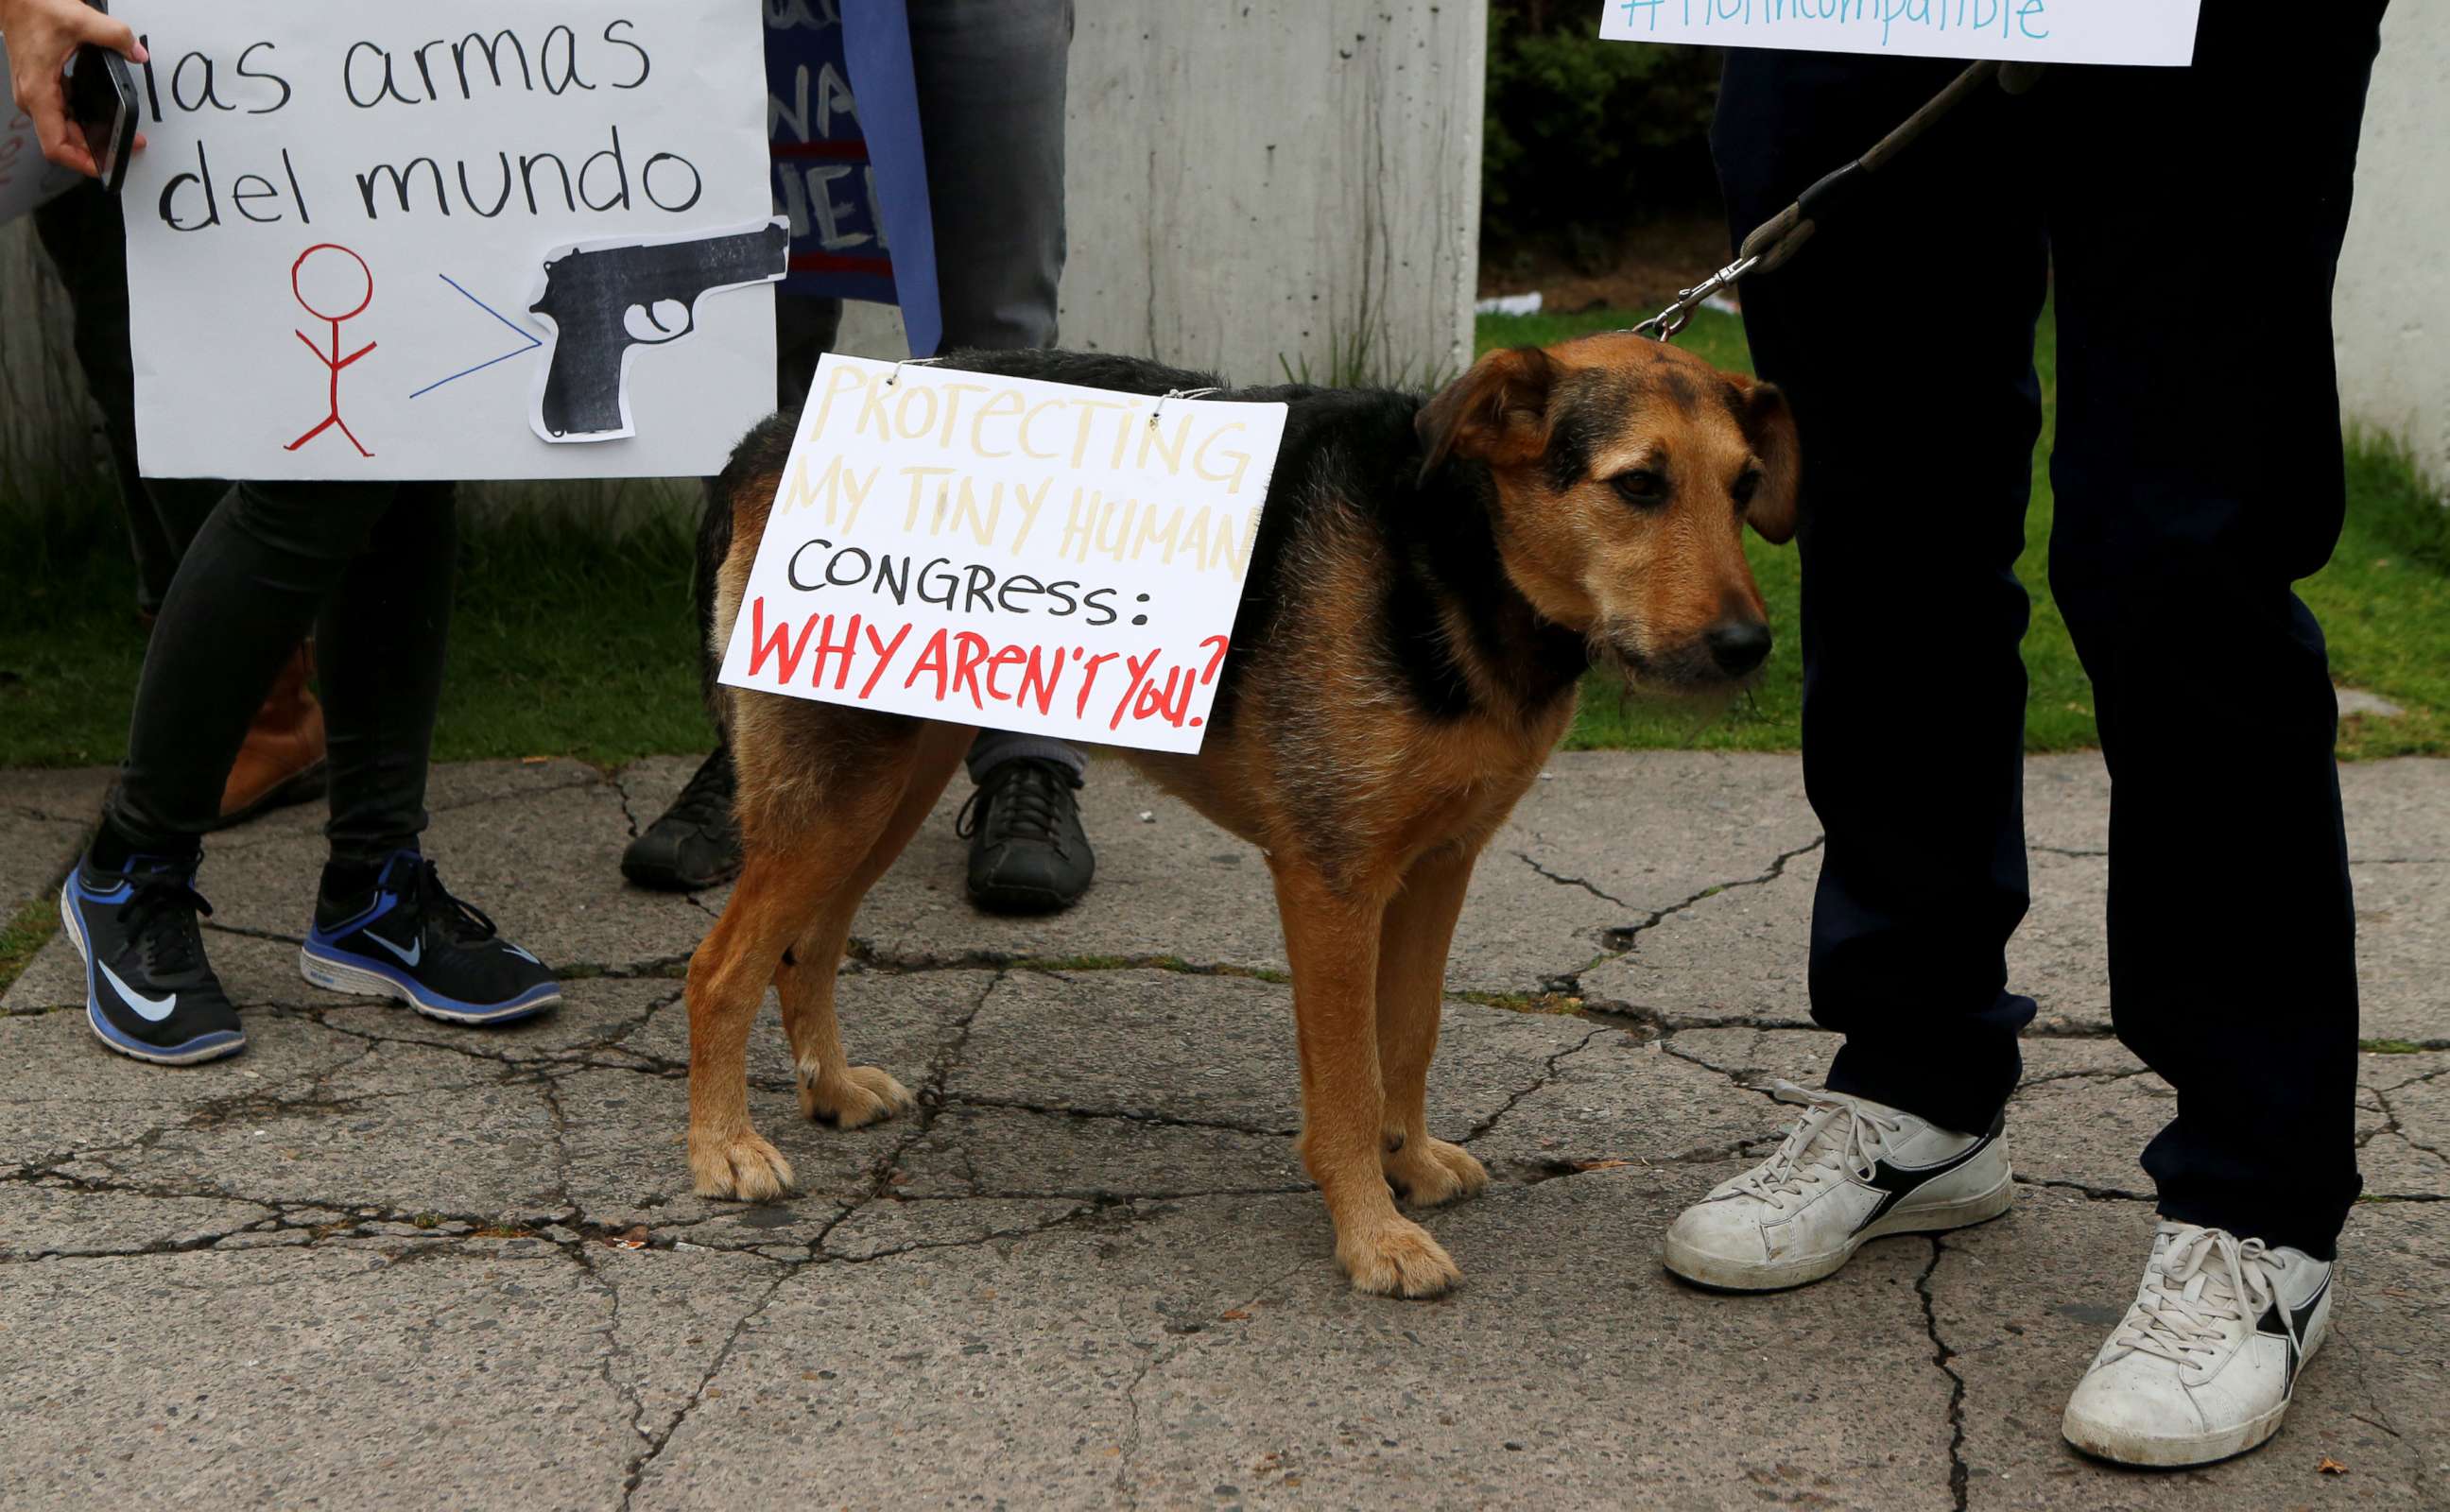 PHOTO: People with a dog participate in the March for Our Lives outside the U.S. embassy in Bogota, Colombia, March 24, 2018.